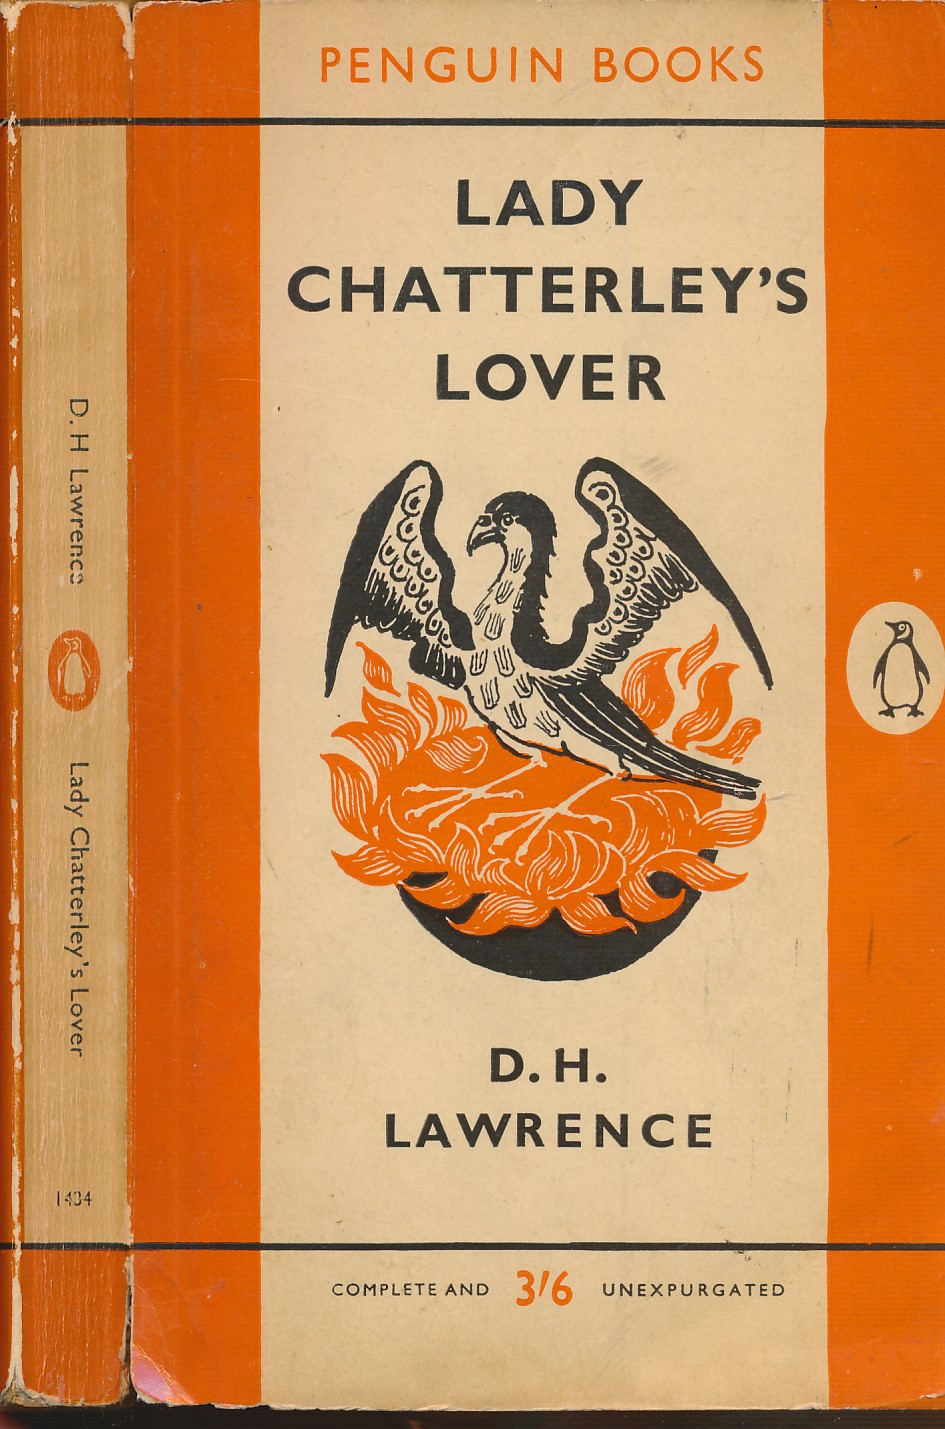 Lady Chatterley's Lover. Penguin Fiction No 1484